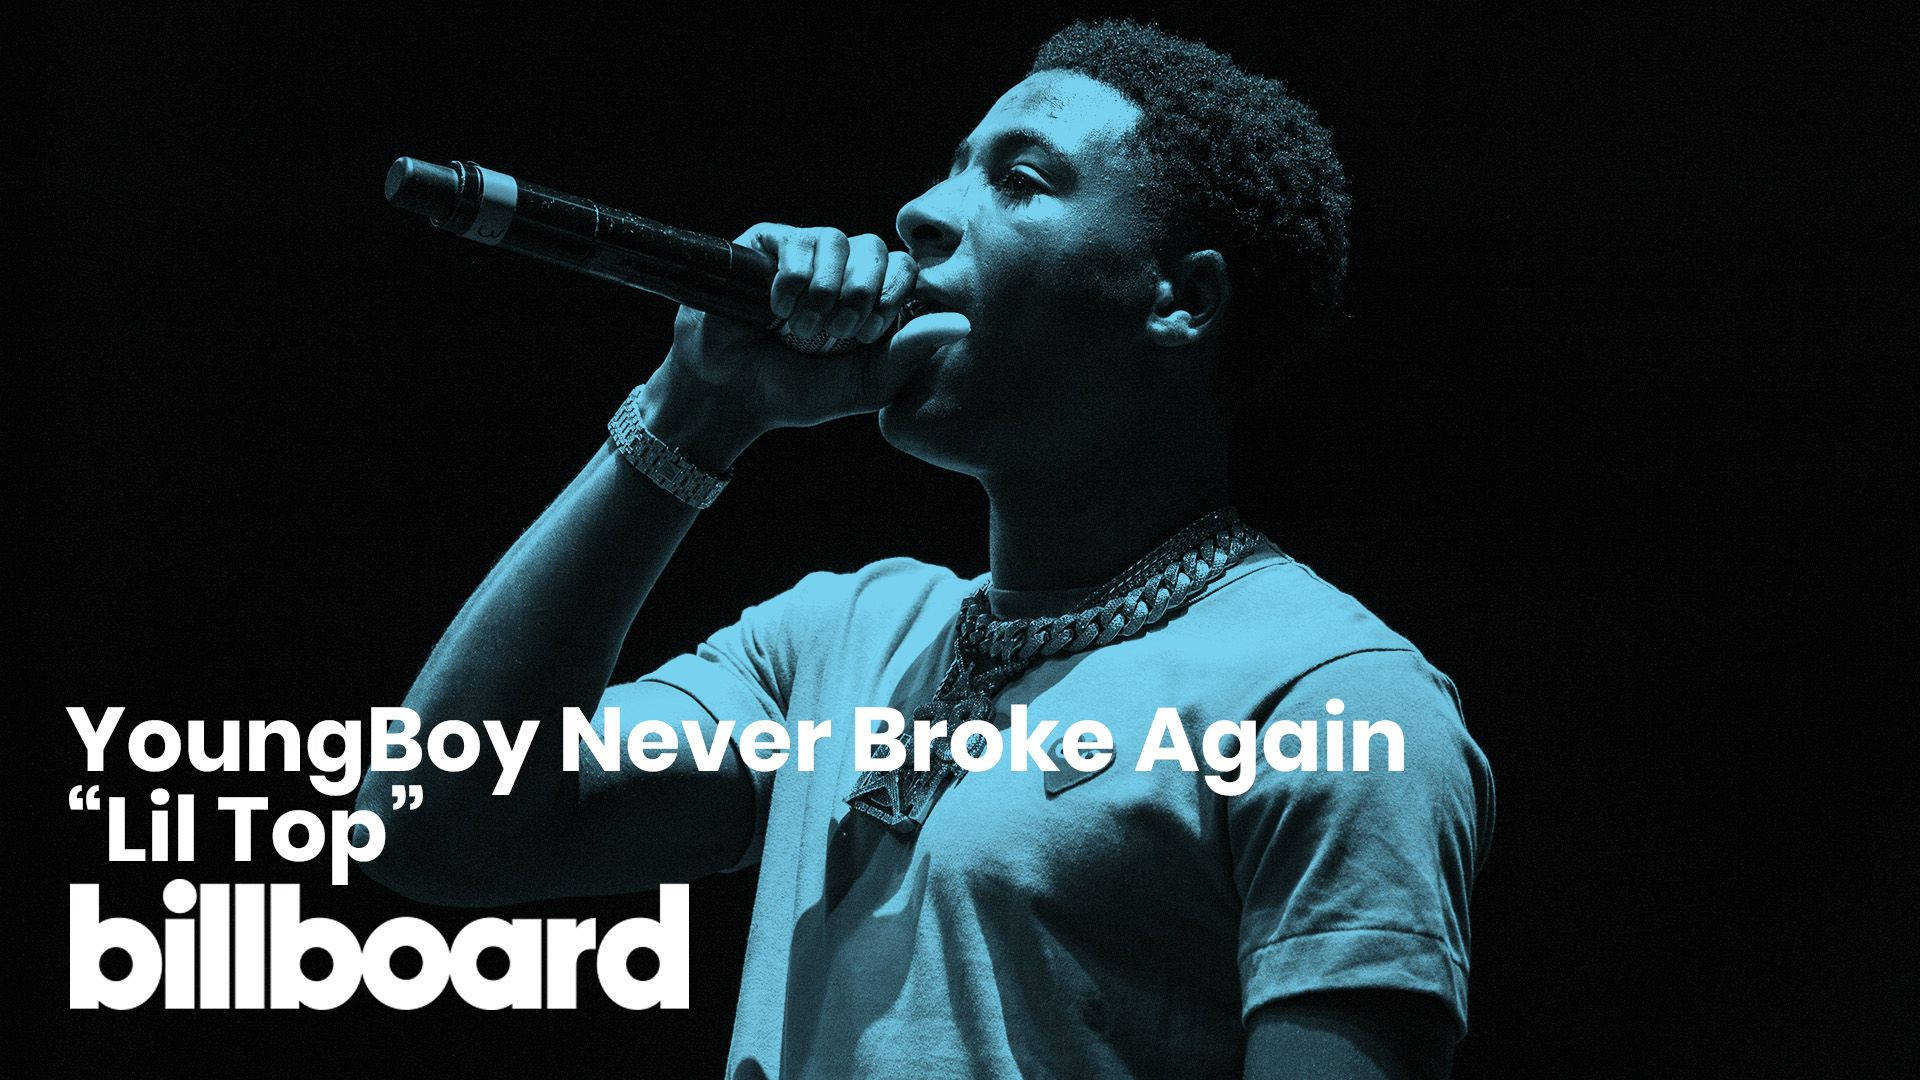 "youngboy Never Broke Again Stands Triumphantly With $$$ Signs Surrounding Him." Wallpaper